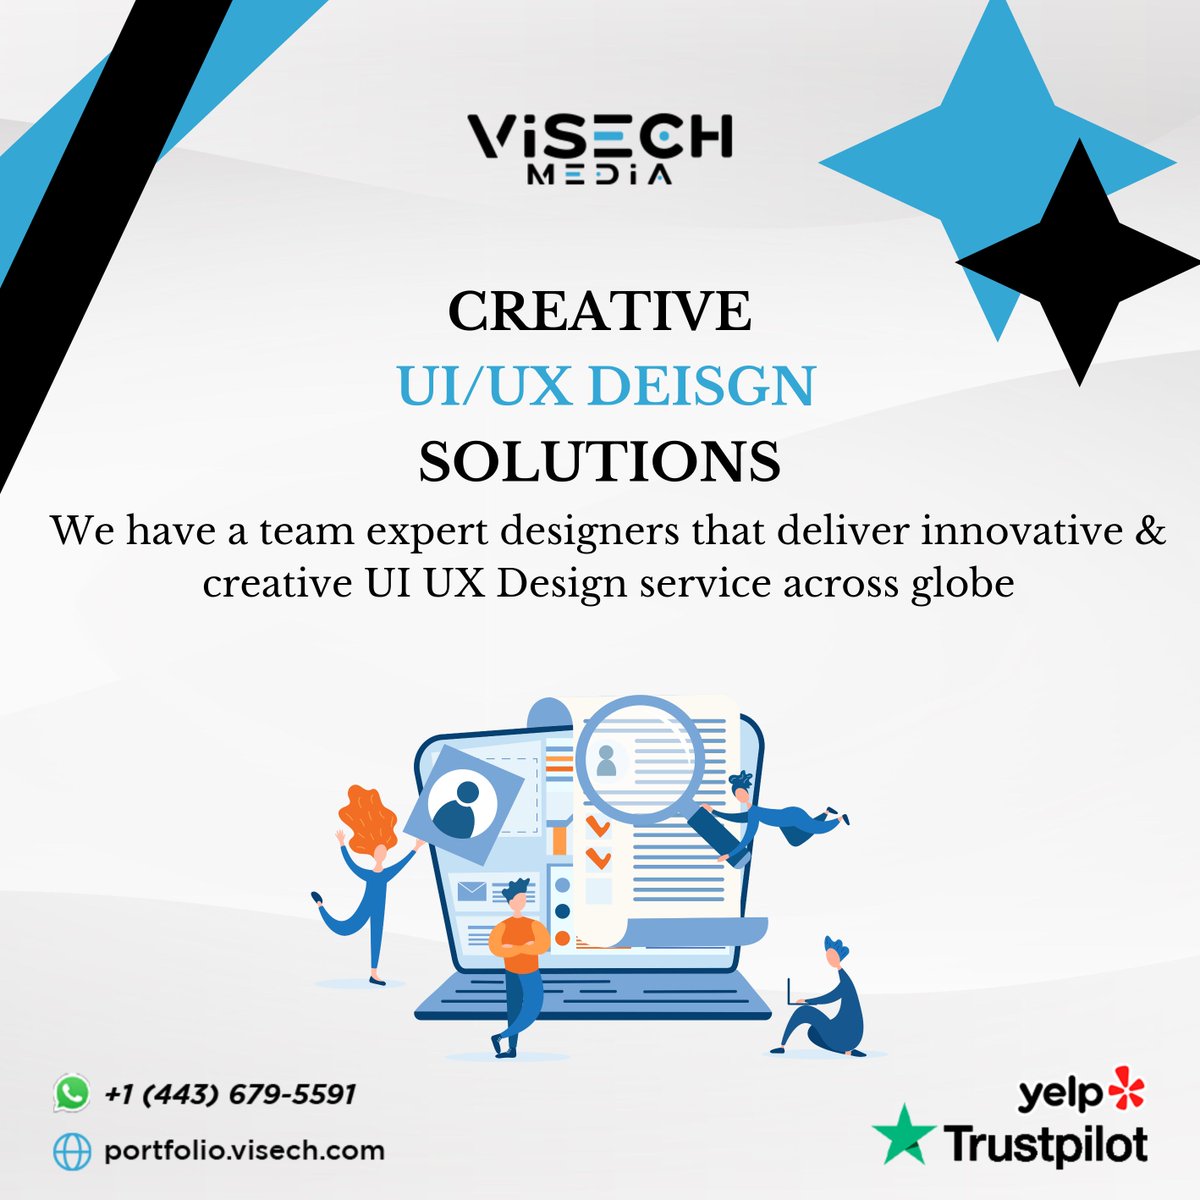 Elevating user experiences through innovative design, meaningful interactions, and a harmonious blend of aesthetics and functionality.'

#DesignInnovation #UXMagic #VisualElegance #SeamlessExperience #UserFirst #InteractiveDelights #AestheticFlow #DigitalElegance #IntuitiveDesign